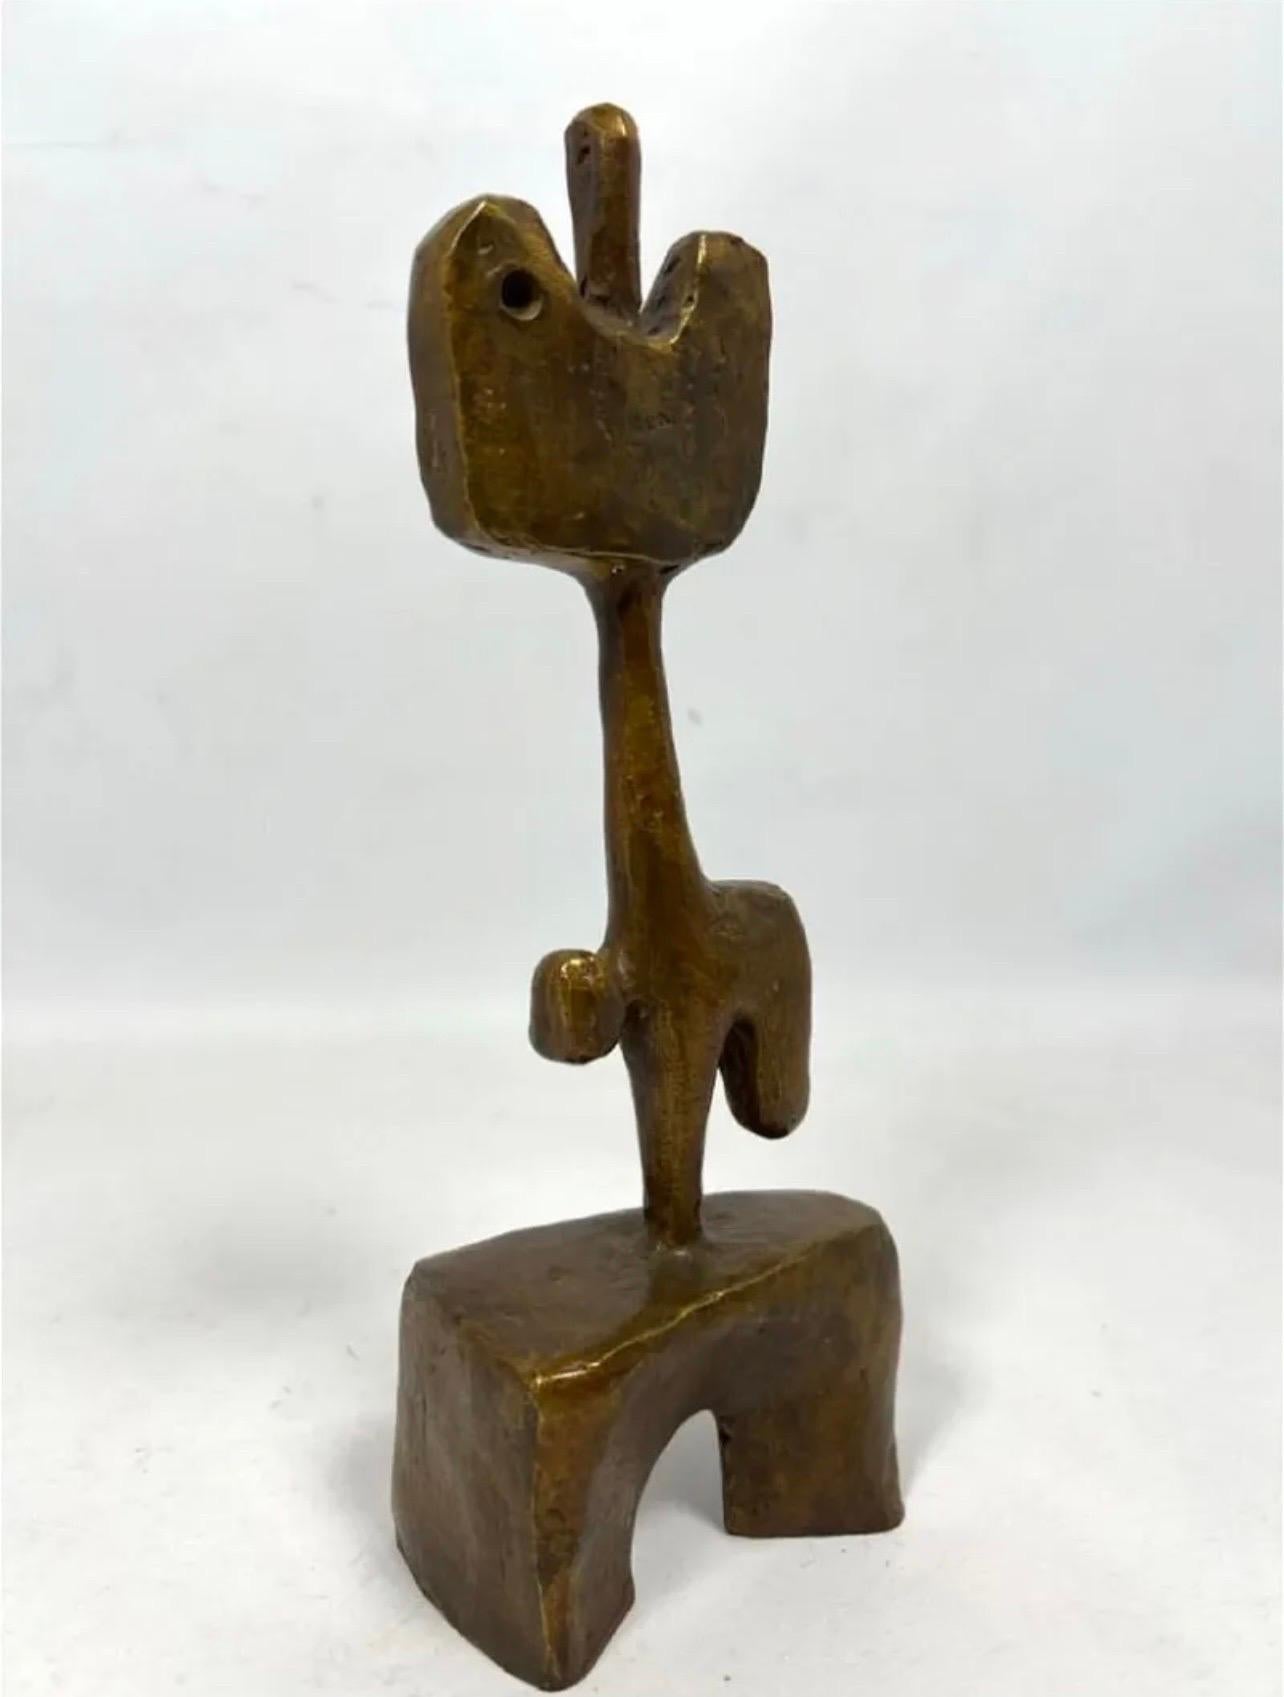 Mathias Goeritz (German Mexican, 1915-1990)
Bronze sculpture
Signed and numbered
Dimensions: (approximate) Height: 10 inches, Width: 4 inches, Depth: 2 inches.  
This is a cast bronze sculpture in an amorphous figure shape, quite heavy. Reminiscent